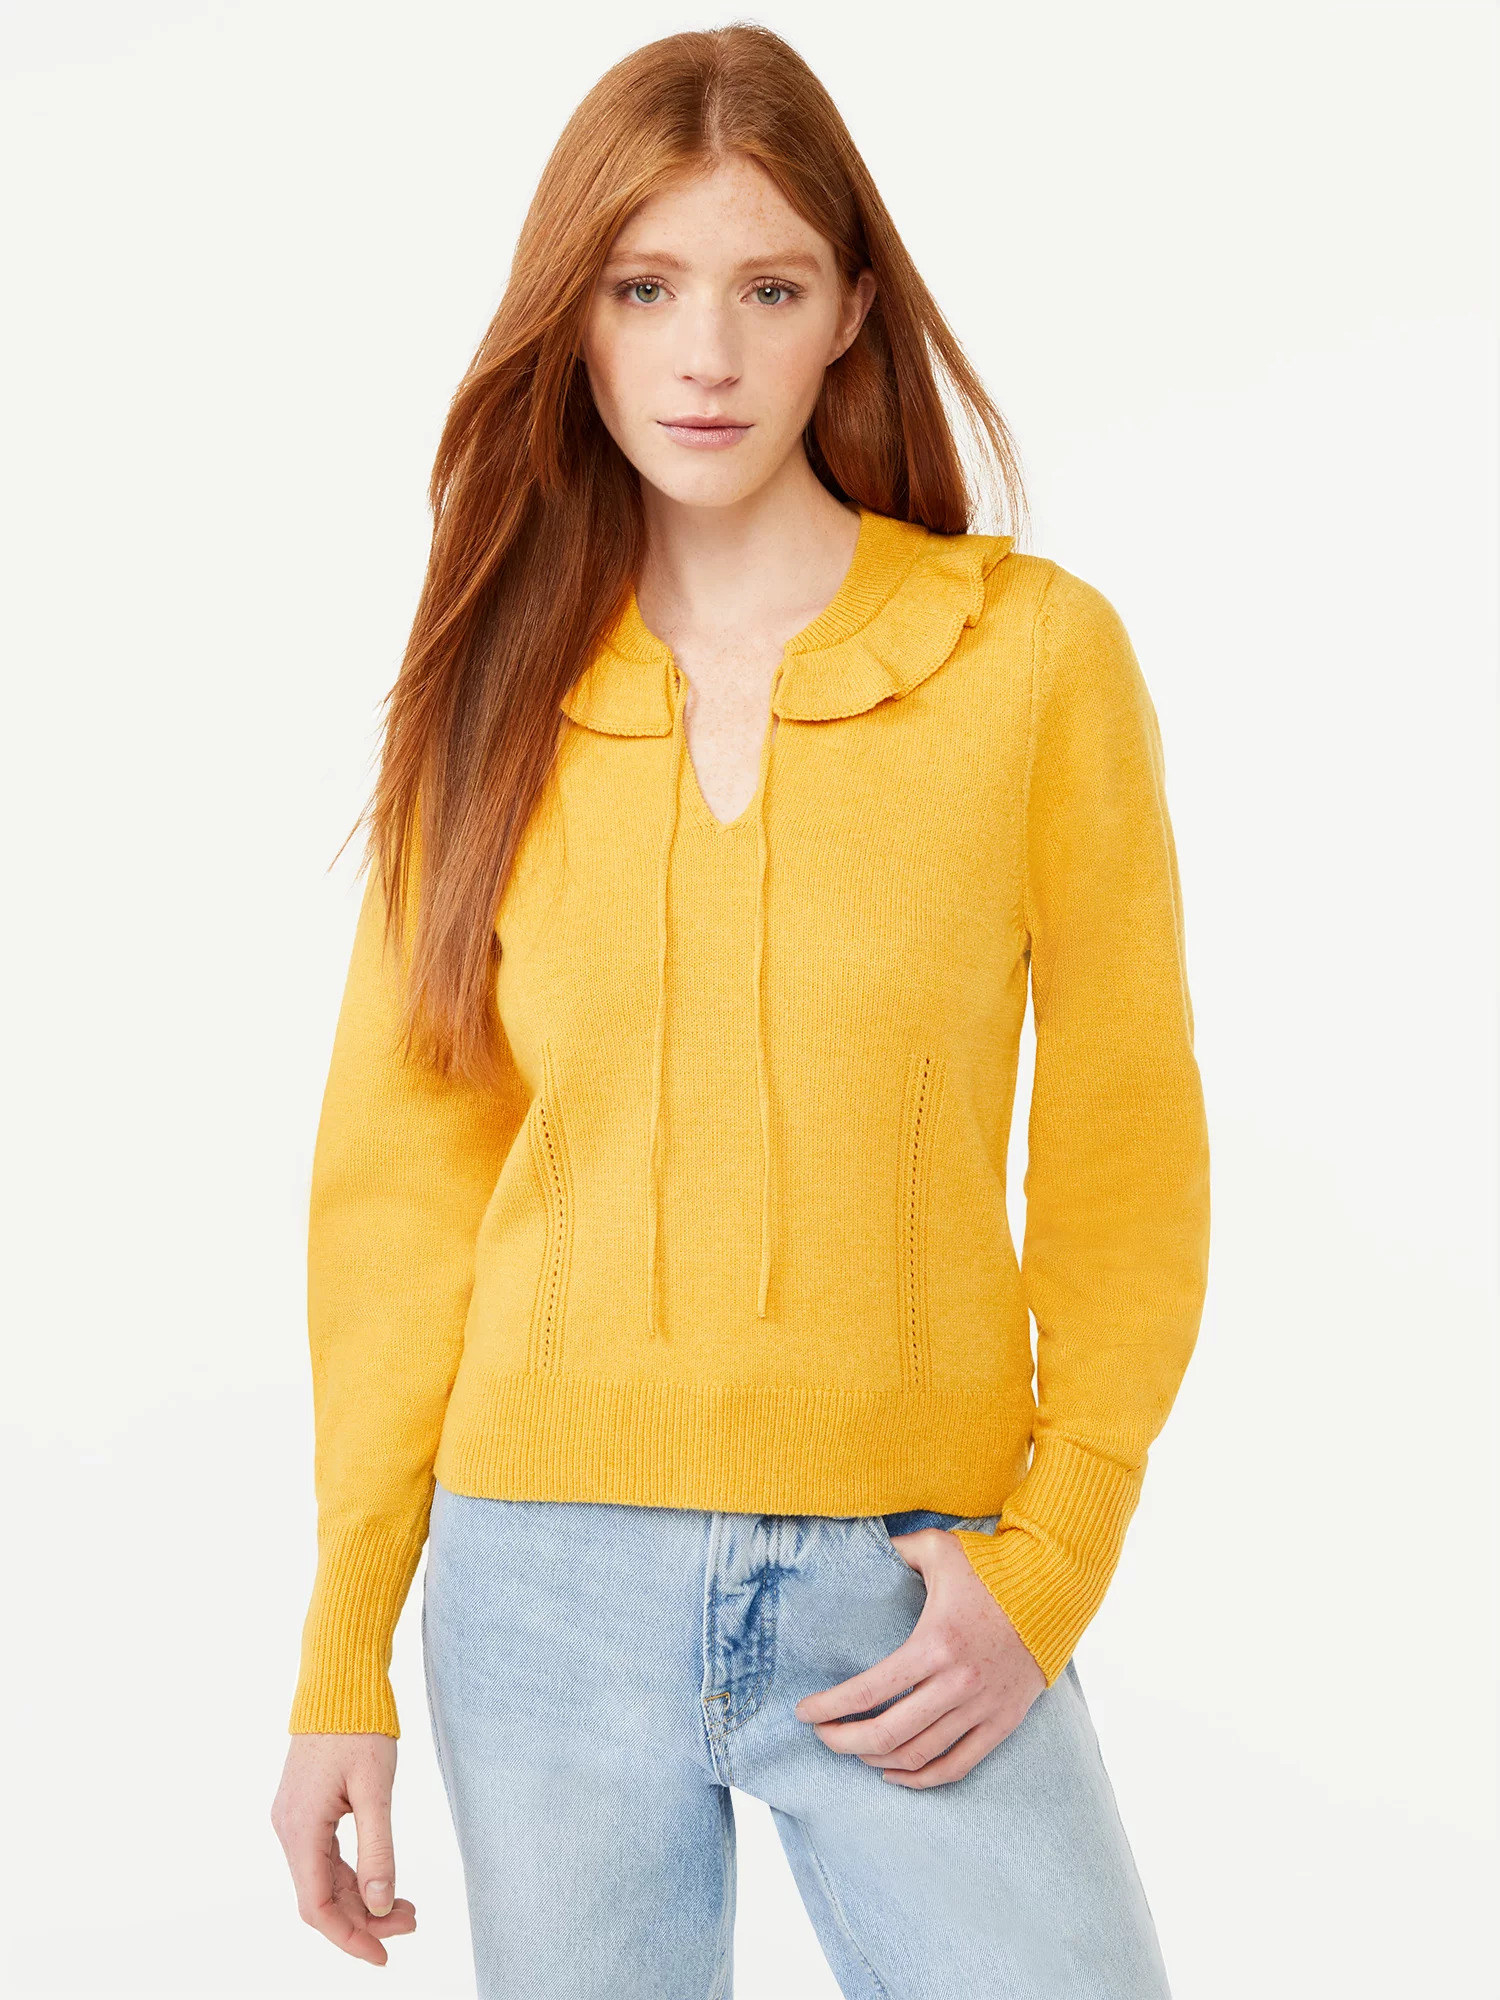 Model wearing the mineral yellow sweater